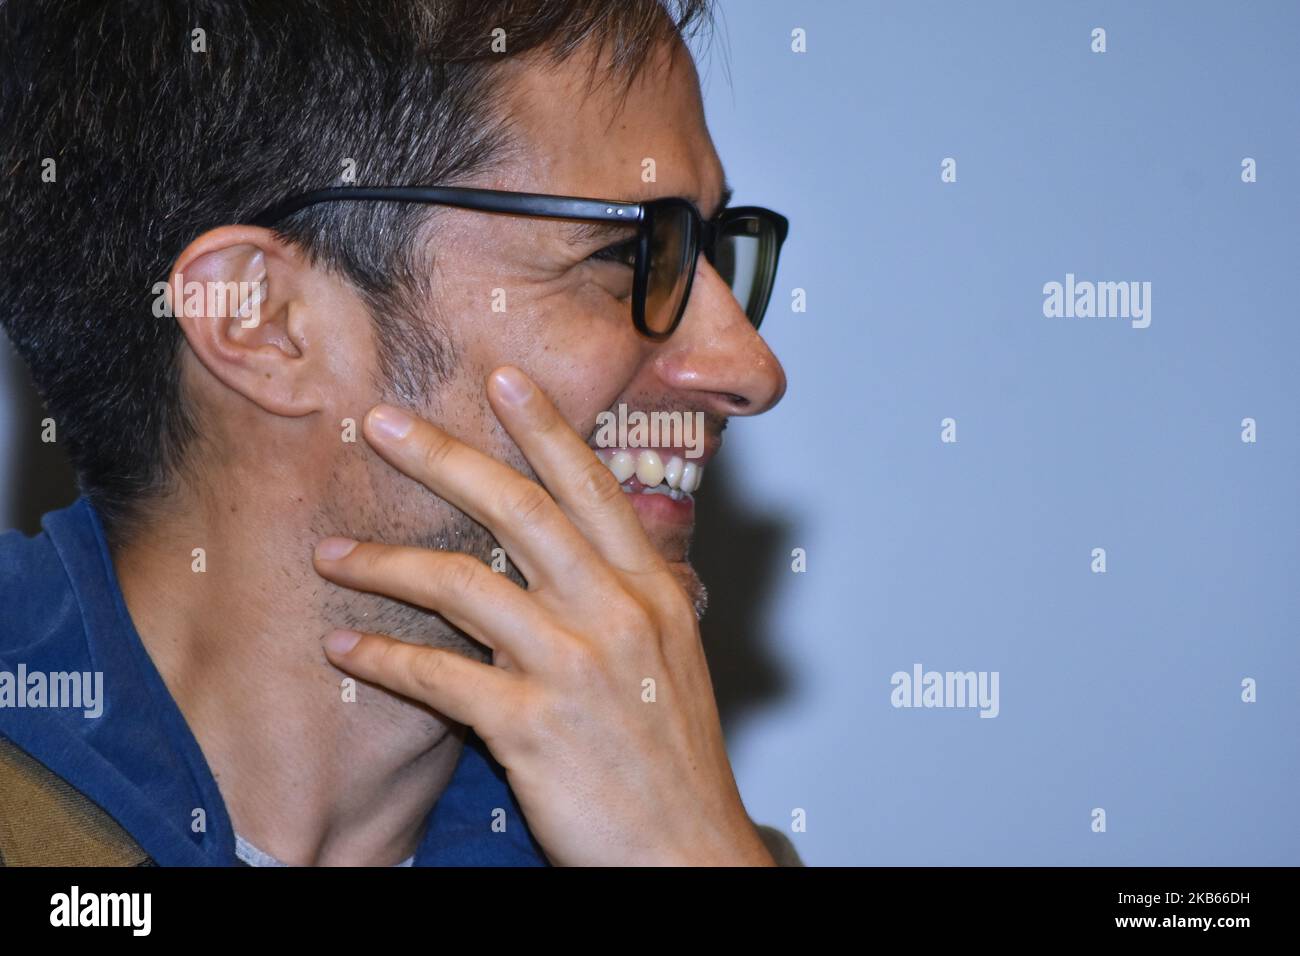 Actor Gael Garcia Bernal speaks during a press conference to announce that 'Ambulante' presents the platform 'Reconstructions' on the occasion of the second anniversary of the earthquakes of September 17, 19 and 23 of 2017, preserves the reconstruction with the project 'Let's raise Mexico in communities affected by the Earthquakes' an initiative that managed to raise 1,672,440.82 Dollars for the benefit of the most affected communities at Centro Cultural de España en México on September 17, 2019 in Mexico City, Mexico (Photo by Eyepix/NurPhoto) Stock Photo